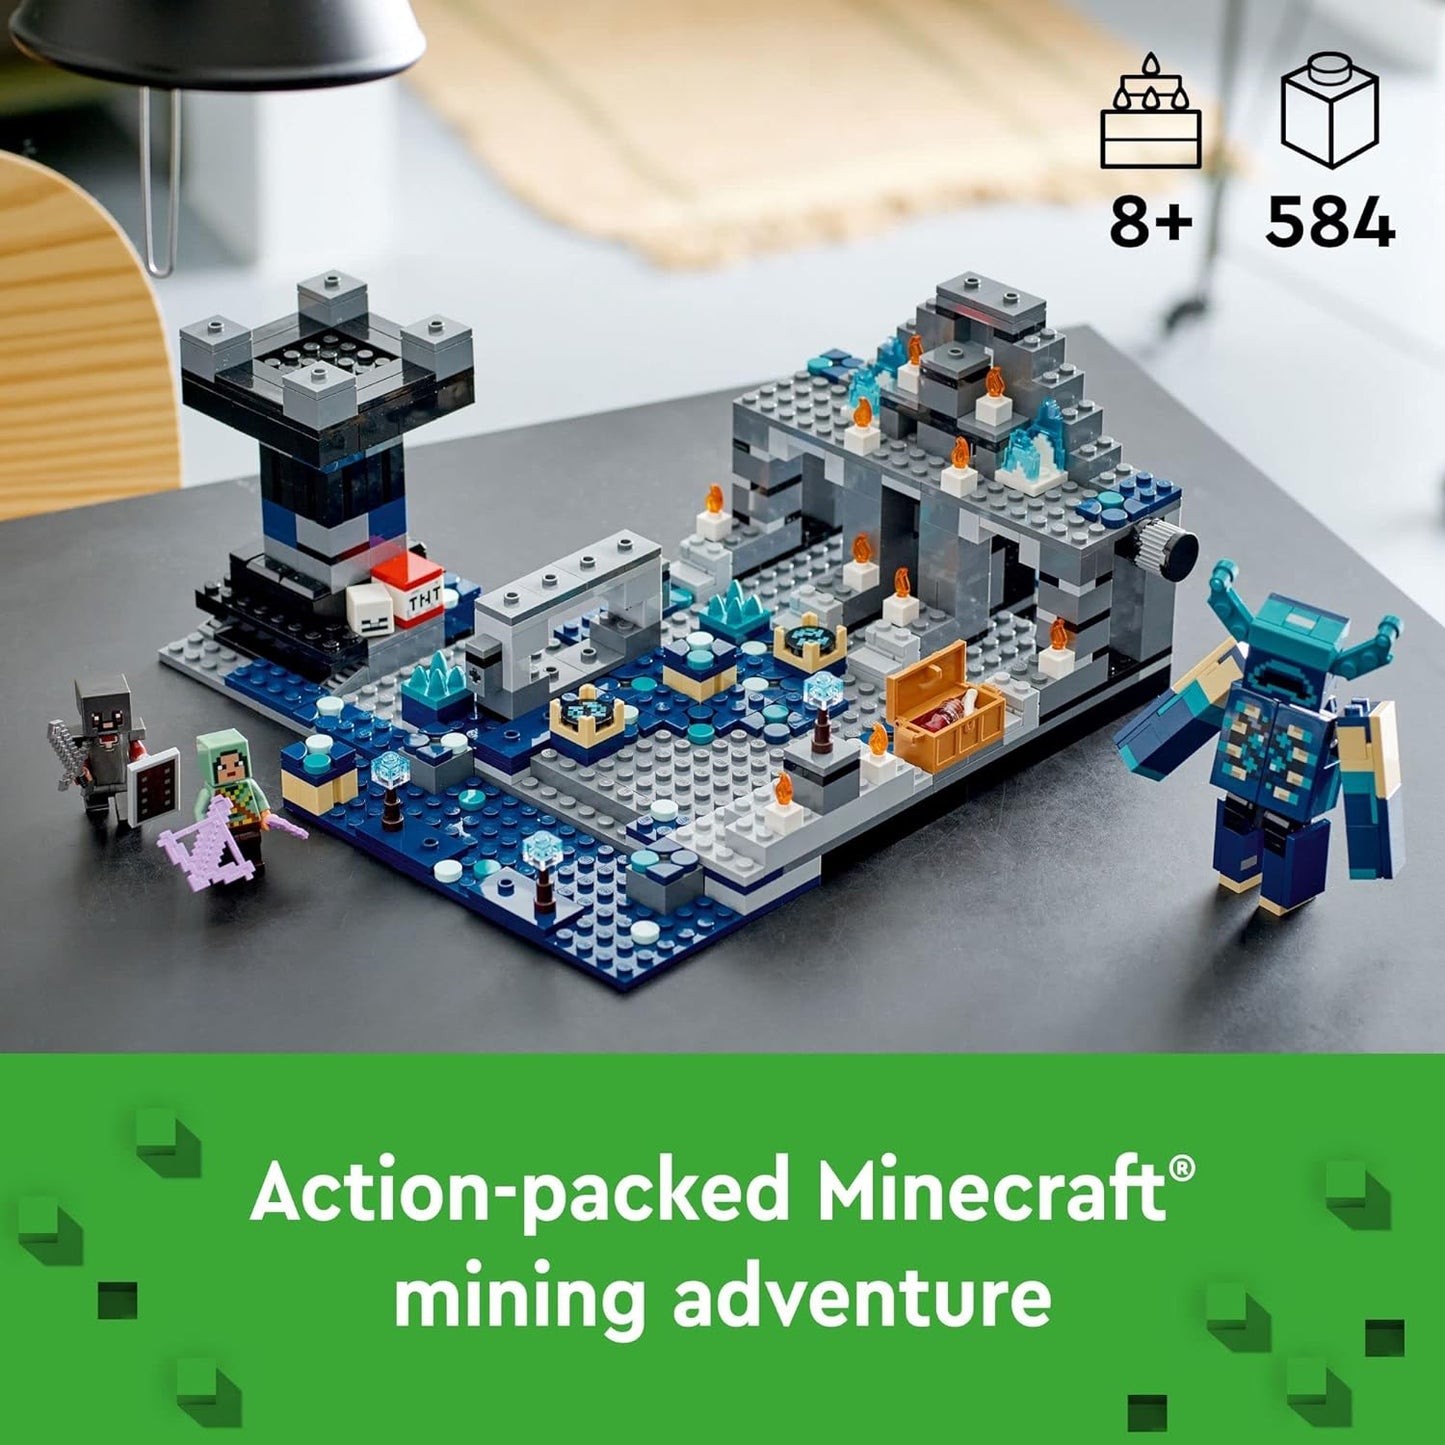 LEGO Minecraft The Deep Dark Battle Set, 21246 Biome Adventure Toy, Ancient City with Warden Figure, Exploding Tower & Treasure Chest, for Kids Ages 8 Plus